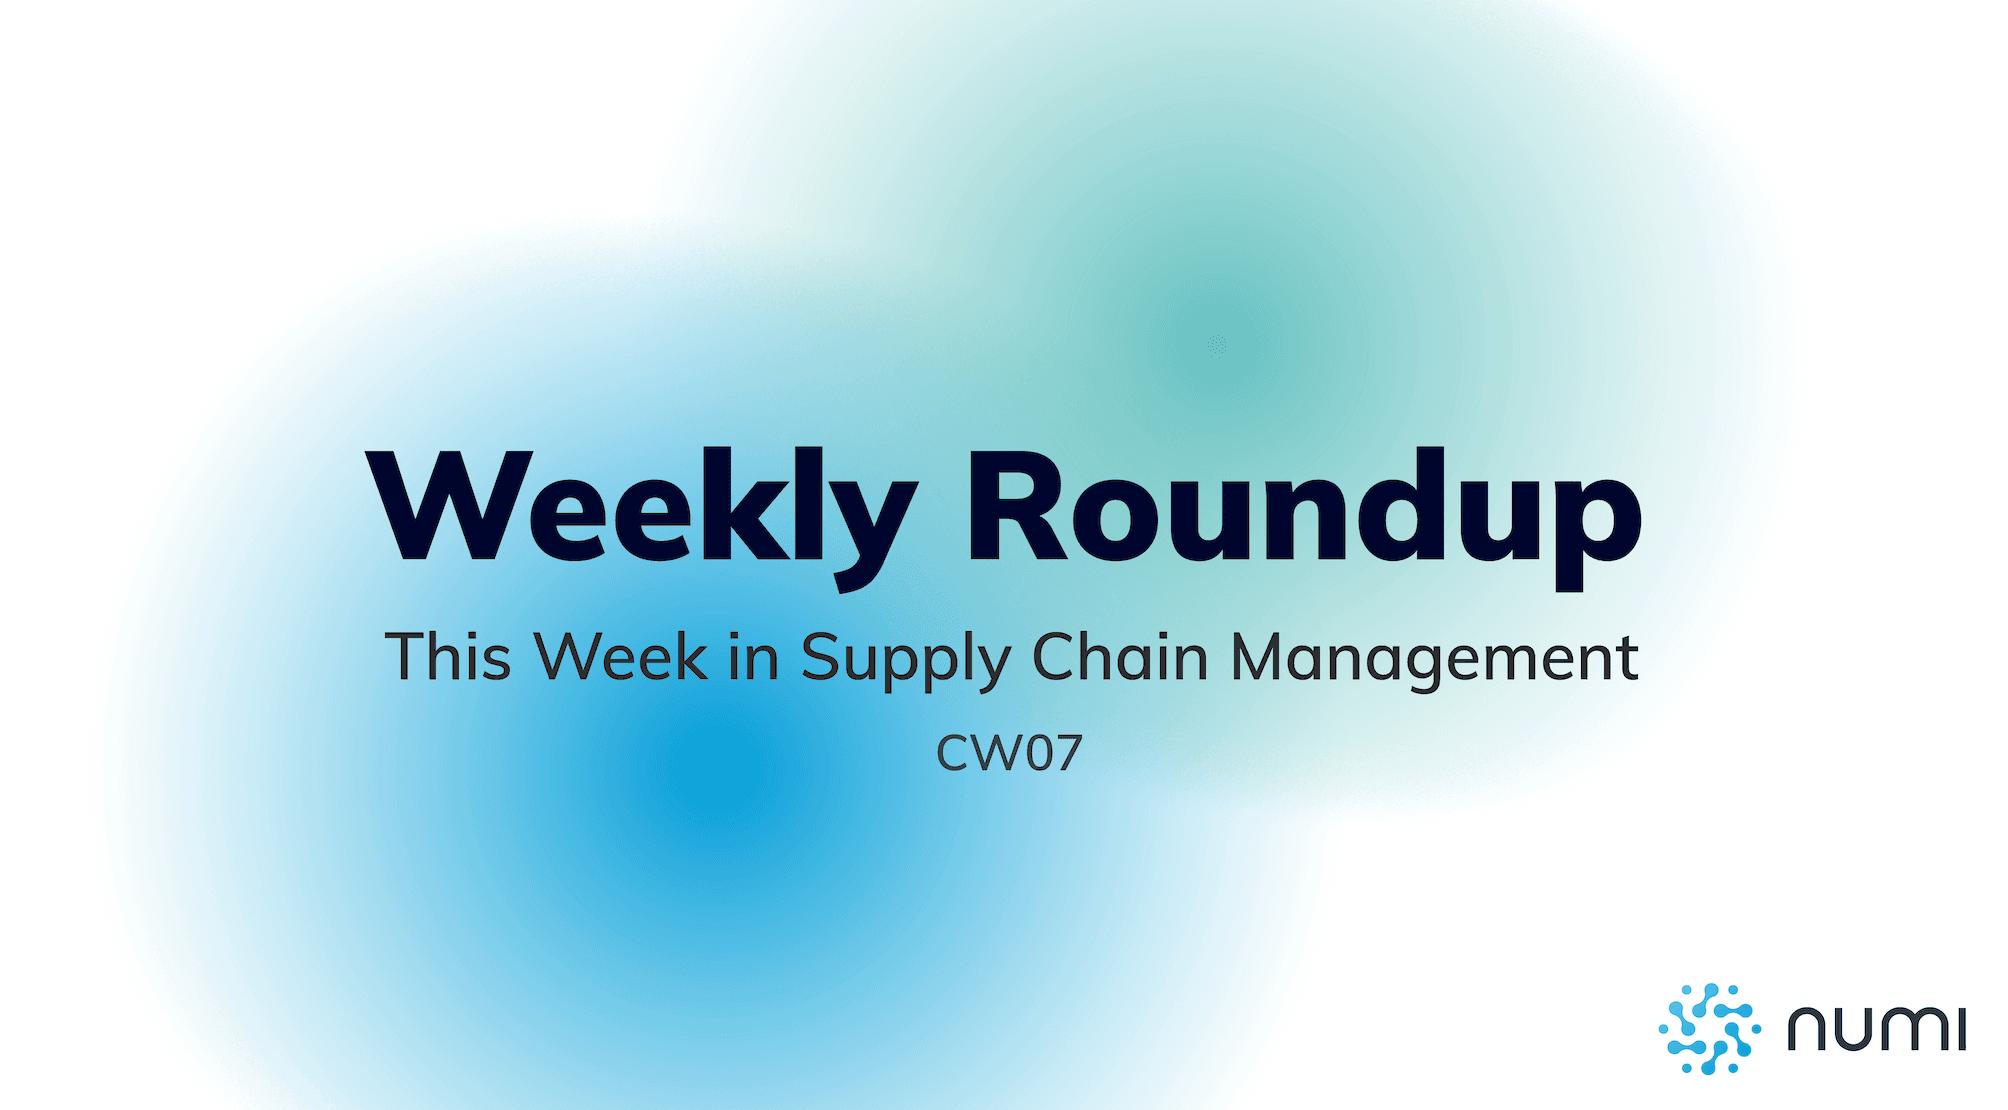 Weekly Roundup - Reduction in Spare Capacity, Disruptions in German Companies and Commitment to Sustainability Goals